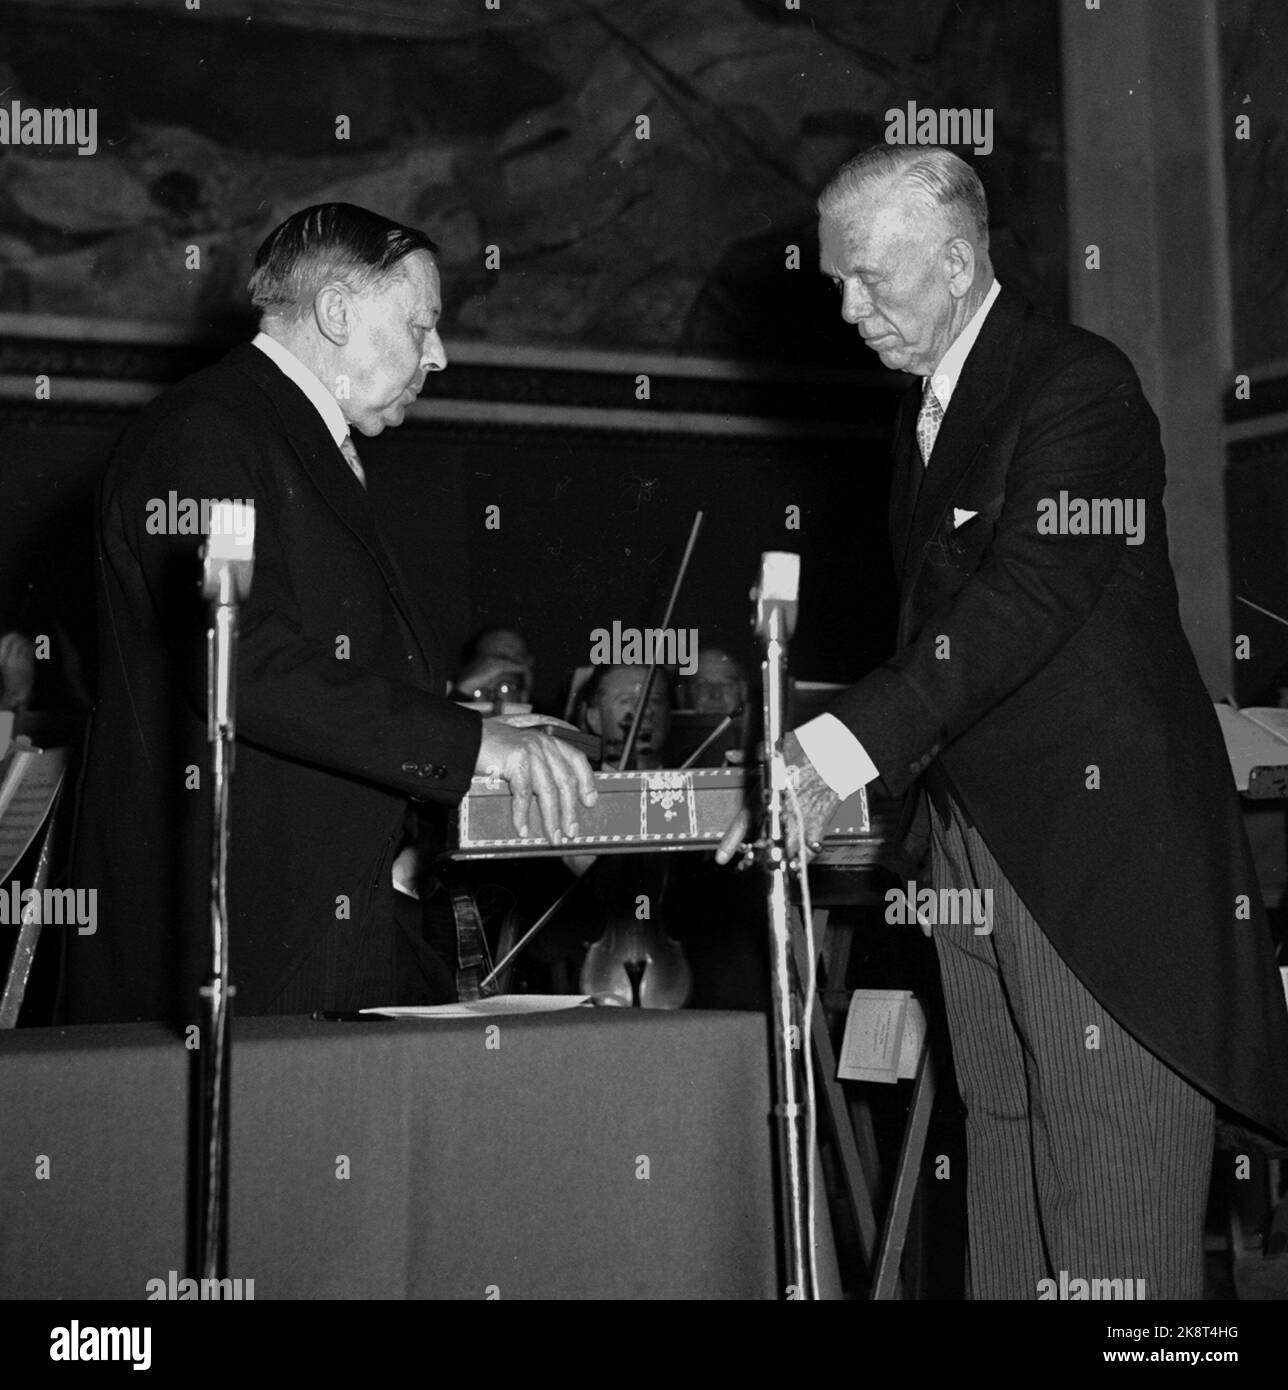 Oslo 19531210 The Peace Prize: Nobel Peace Prize 1953 to George Marshall, American General, former Foreign Minister and Defense Minister, UN Delegate, and initiator of the Marshall Plan aid program. Marshall (th) receives the award from the Nobel Institute's director Gunnar Jahn during the ceremony in the University Aula. Photo NTB / NTB Stock Photo